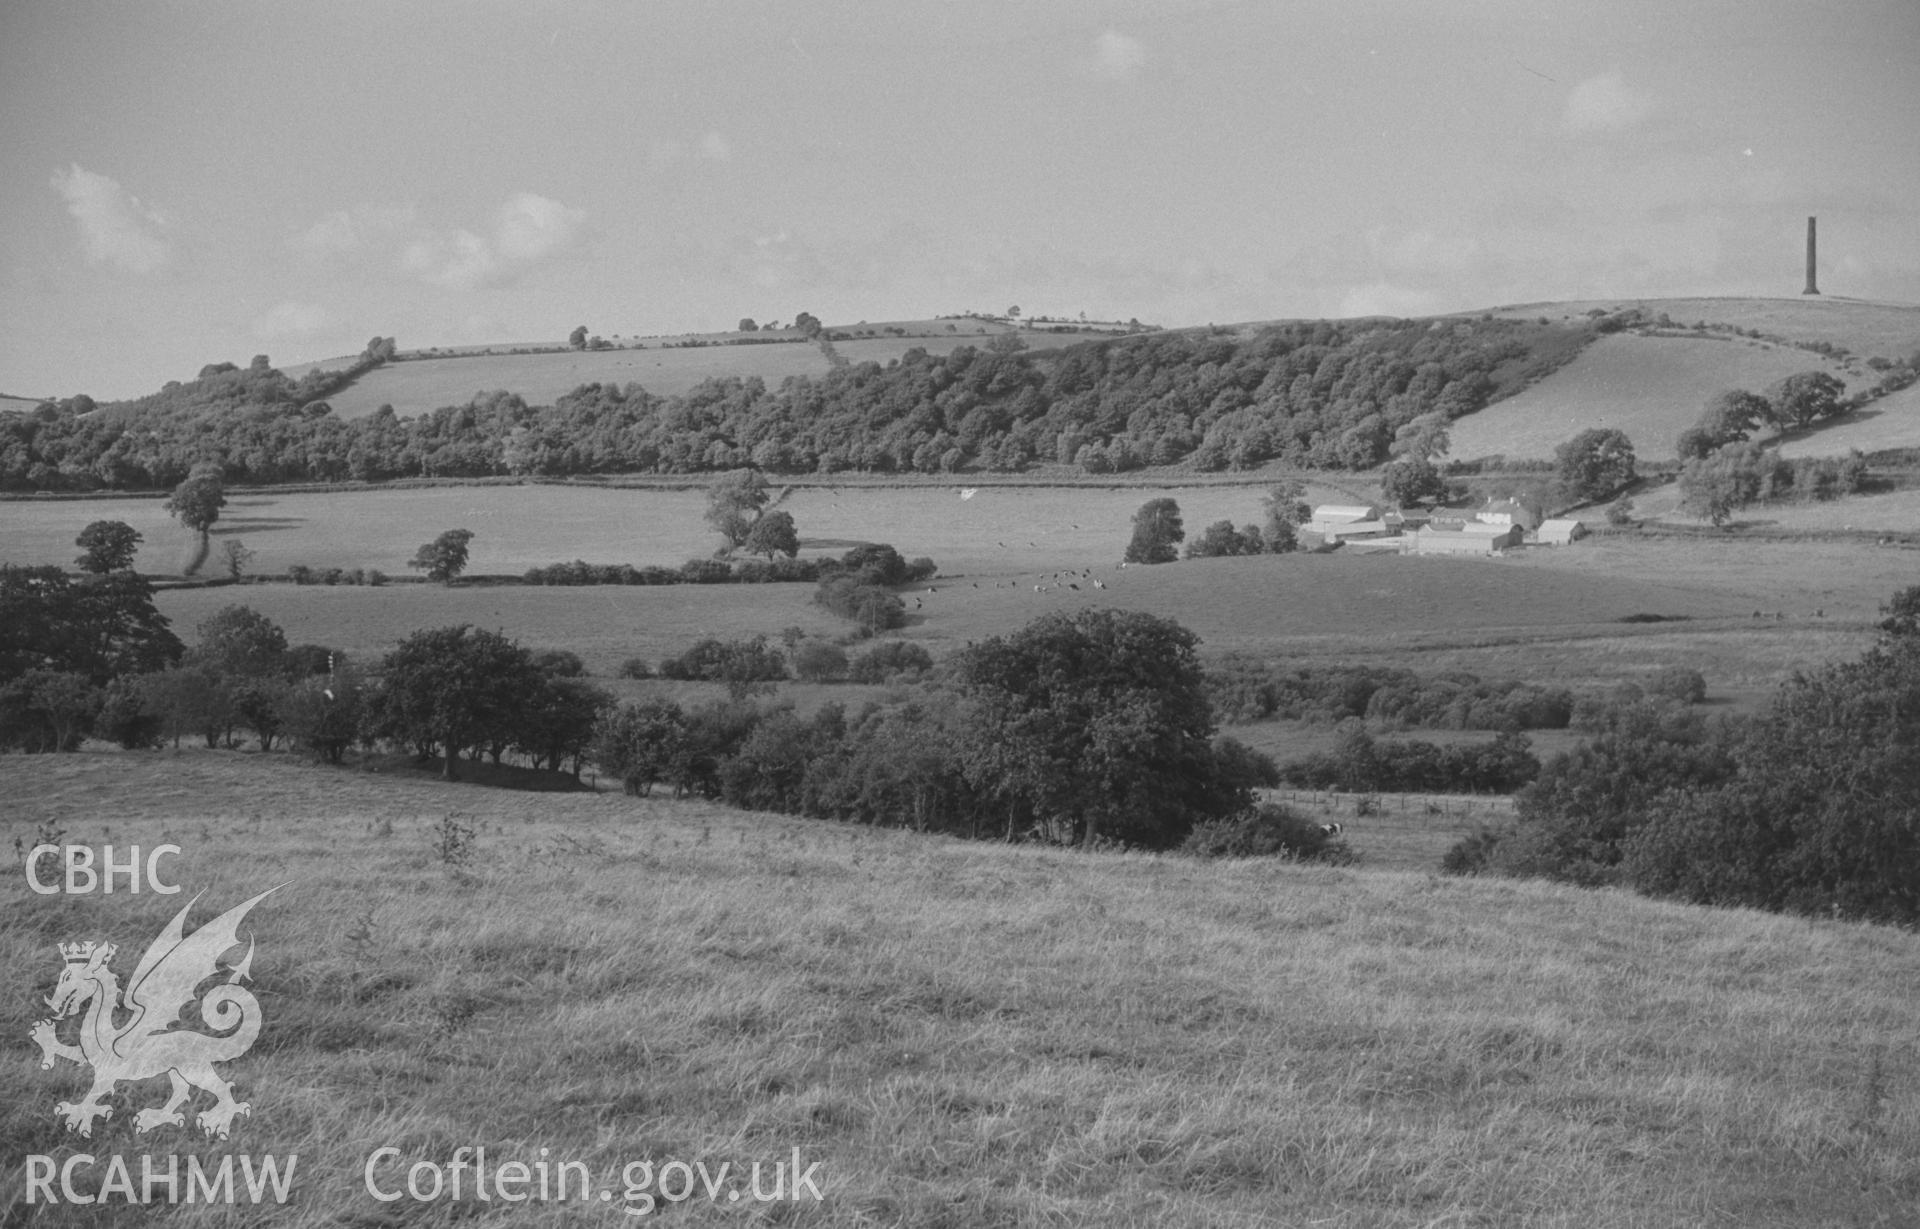 Digital copy of a black and white negative showing panoramic view of Glan Denys, Derry Ormond Monument, Dulas valley and woods by Castell Goetre. Photographed by Arthur O. Chater on 4th September 1966 from Grid Reference SN 591 505. (Photograph 4 of 6).